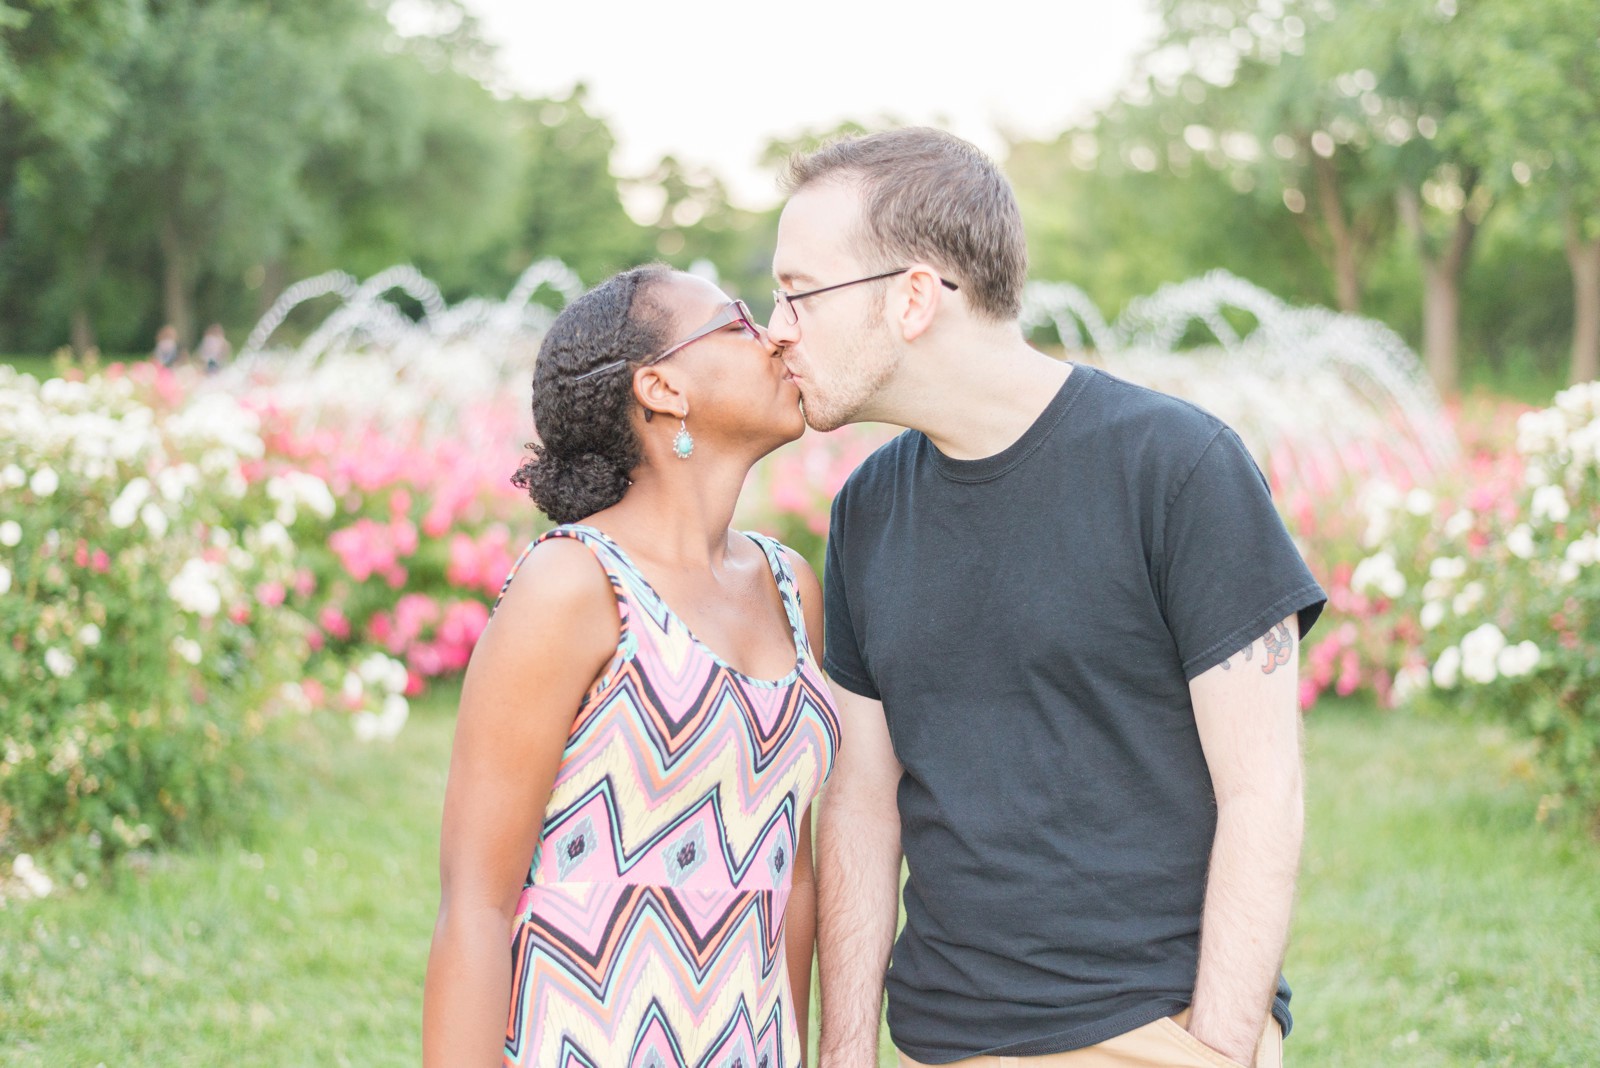 columbus-ohio-engagement-session-at-whetstone-park-of-roses-in-the-summer-time-with-roses_0074